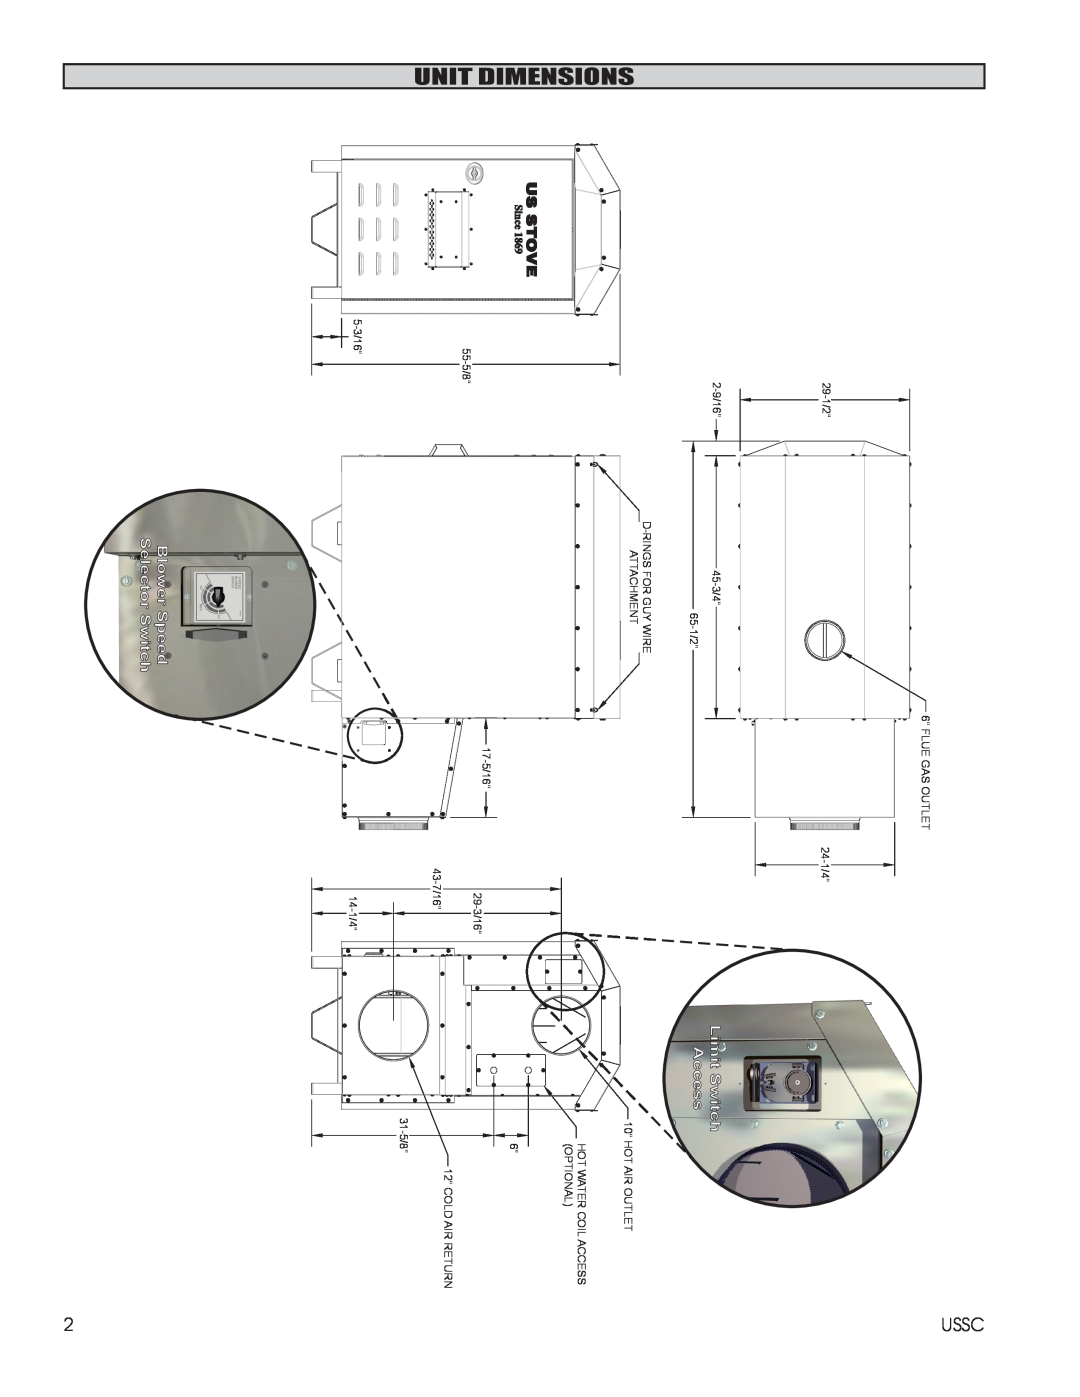 United States Stove 1600EF installation instructions Dimensionsunit, Blower Speed Selector Switch, Limit Switch, Access 